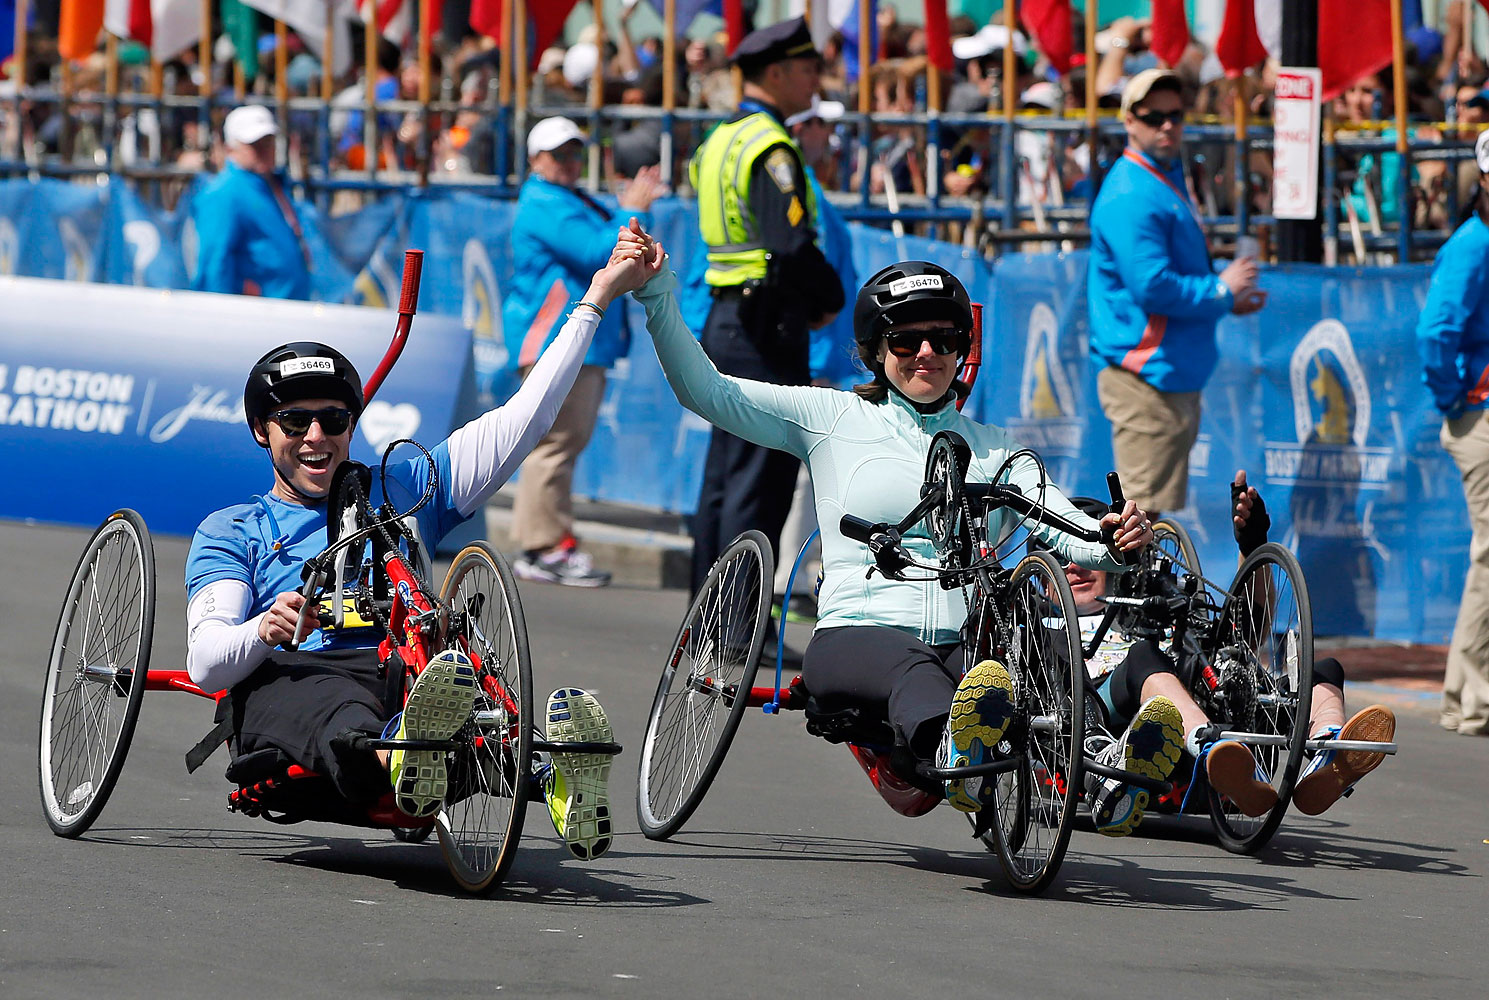 Boston Marathon husband and wife bombing survivors Patrick Downes and Jessica Kensky, who each lost a leg in last year's bombings, roll across the finish line in the 118th Boston Marathon, April 21, 2014 in Boston. (Elise Amendola—AP)